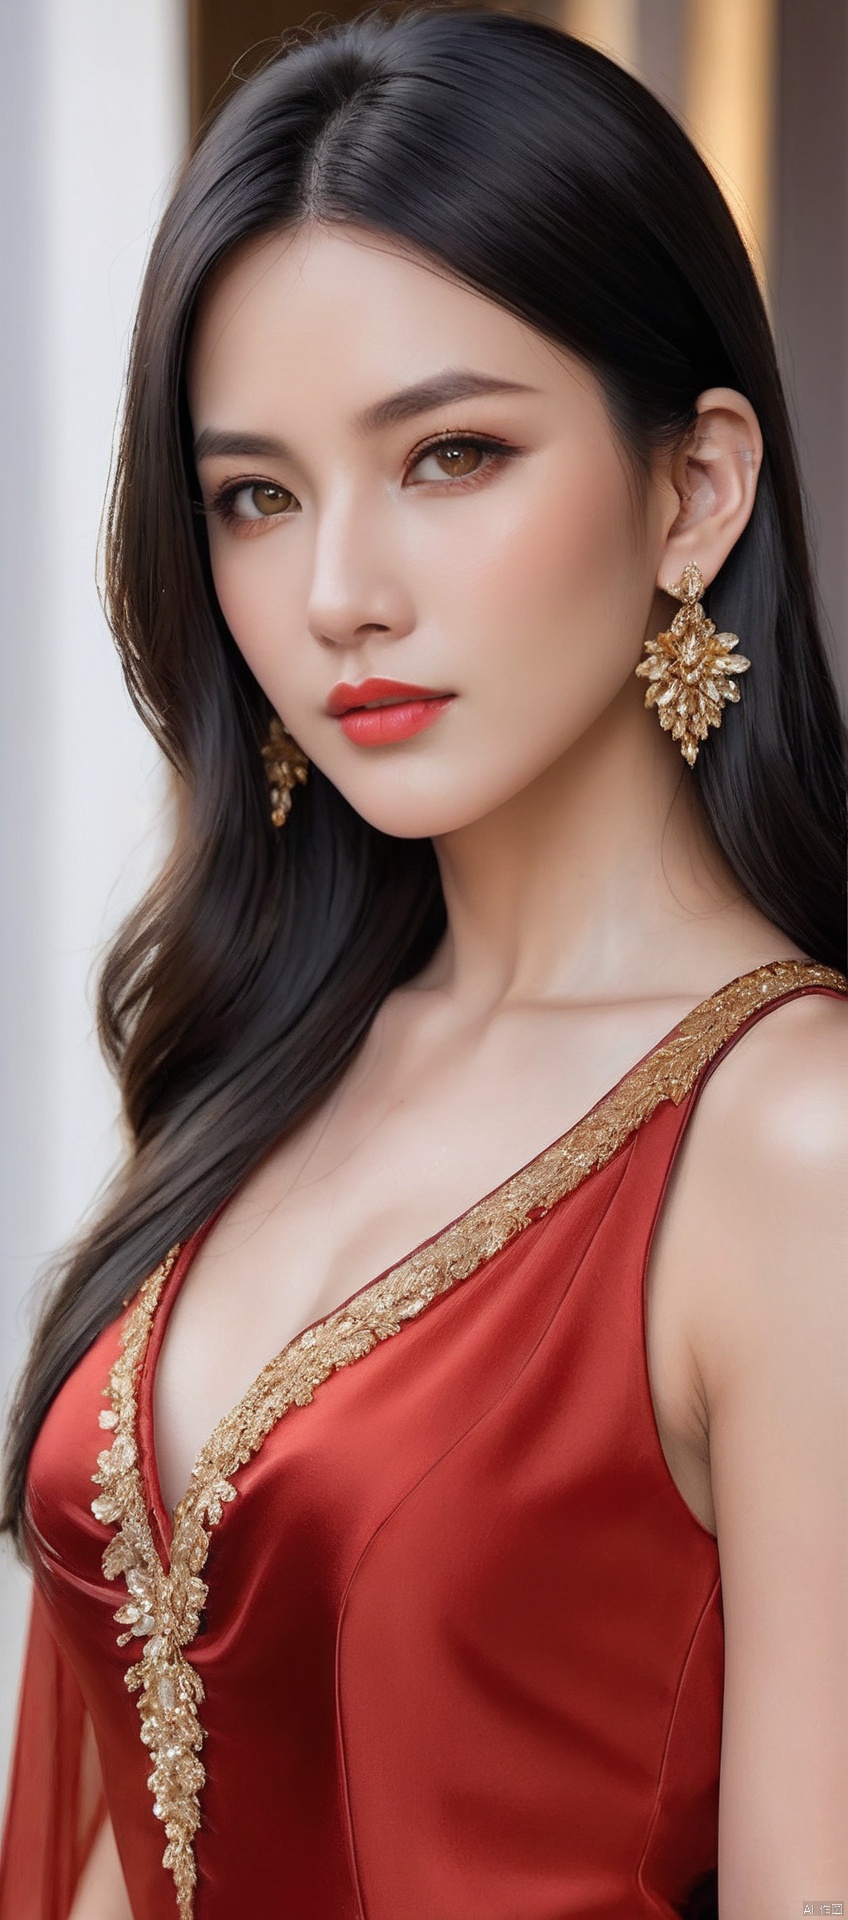 8k,RAW, Fujifilm XT3, masterpiece, best quality, photorealistic,1girl,solo, diamond stud earrings, long straight black hair, hazel eyes, serious expression, slender figure, wearing a red and gold blouse,red and gold dress,(upper body shot), (upper body view),dodger red and gold see through clothes,red and gold transparent shawl,beautiful symmetrical face,in the style of elegant clothing,high heels,g002,g001,